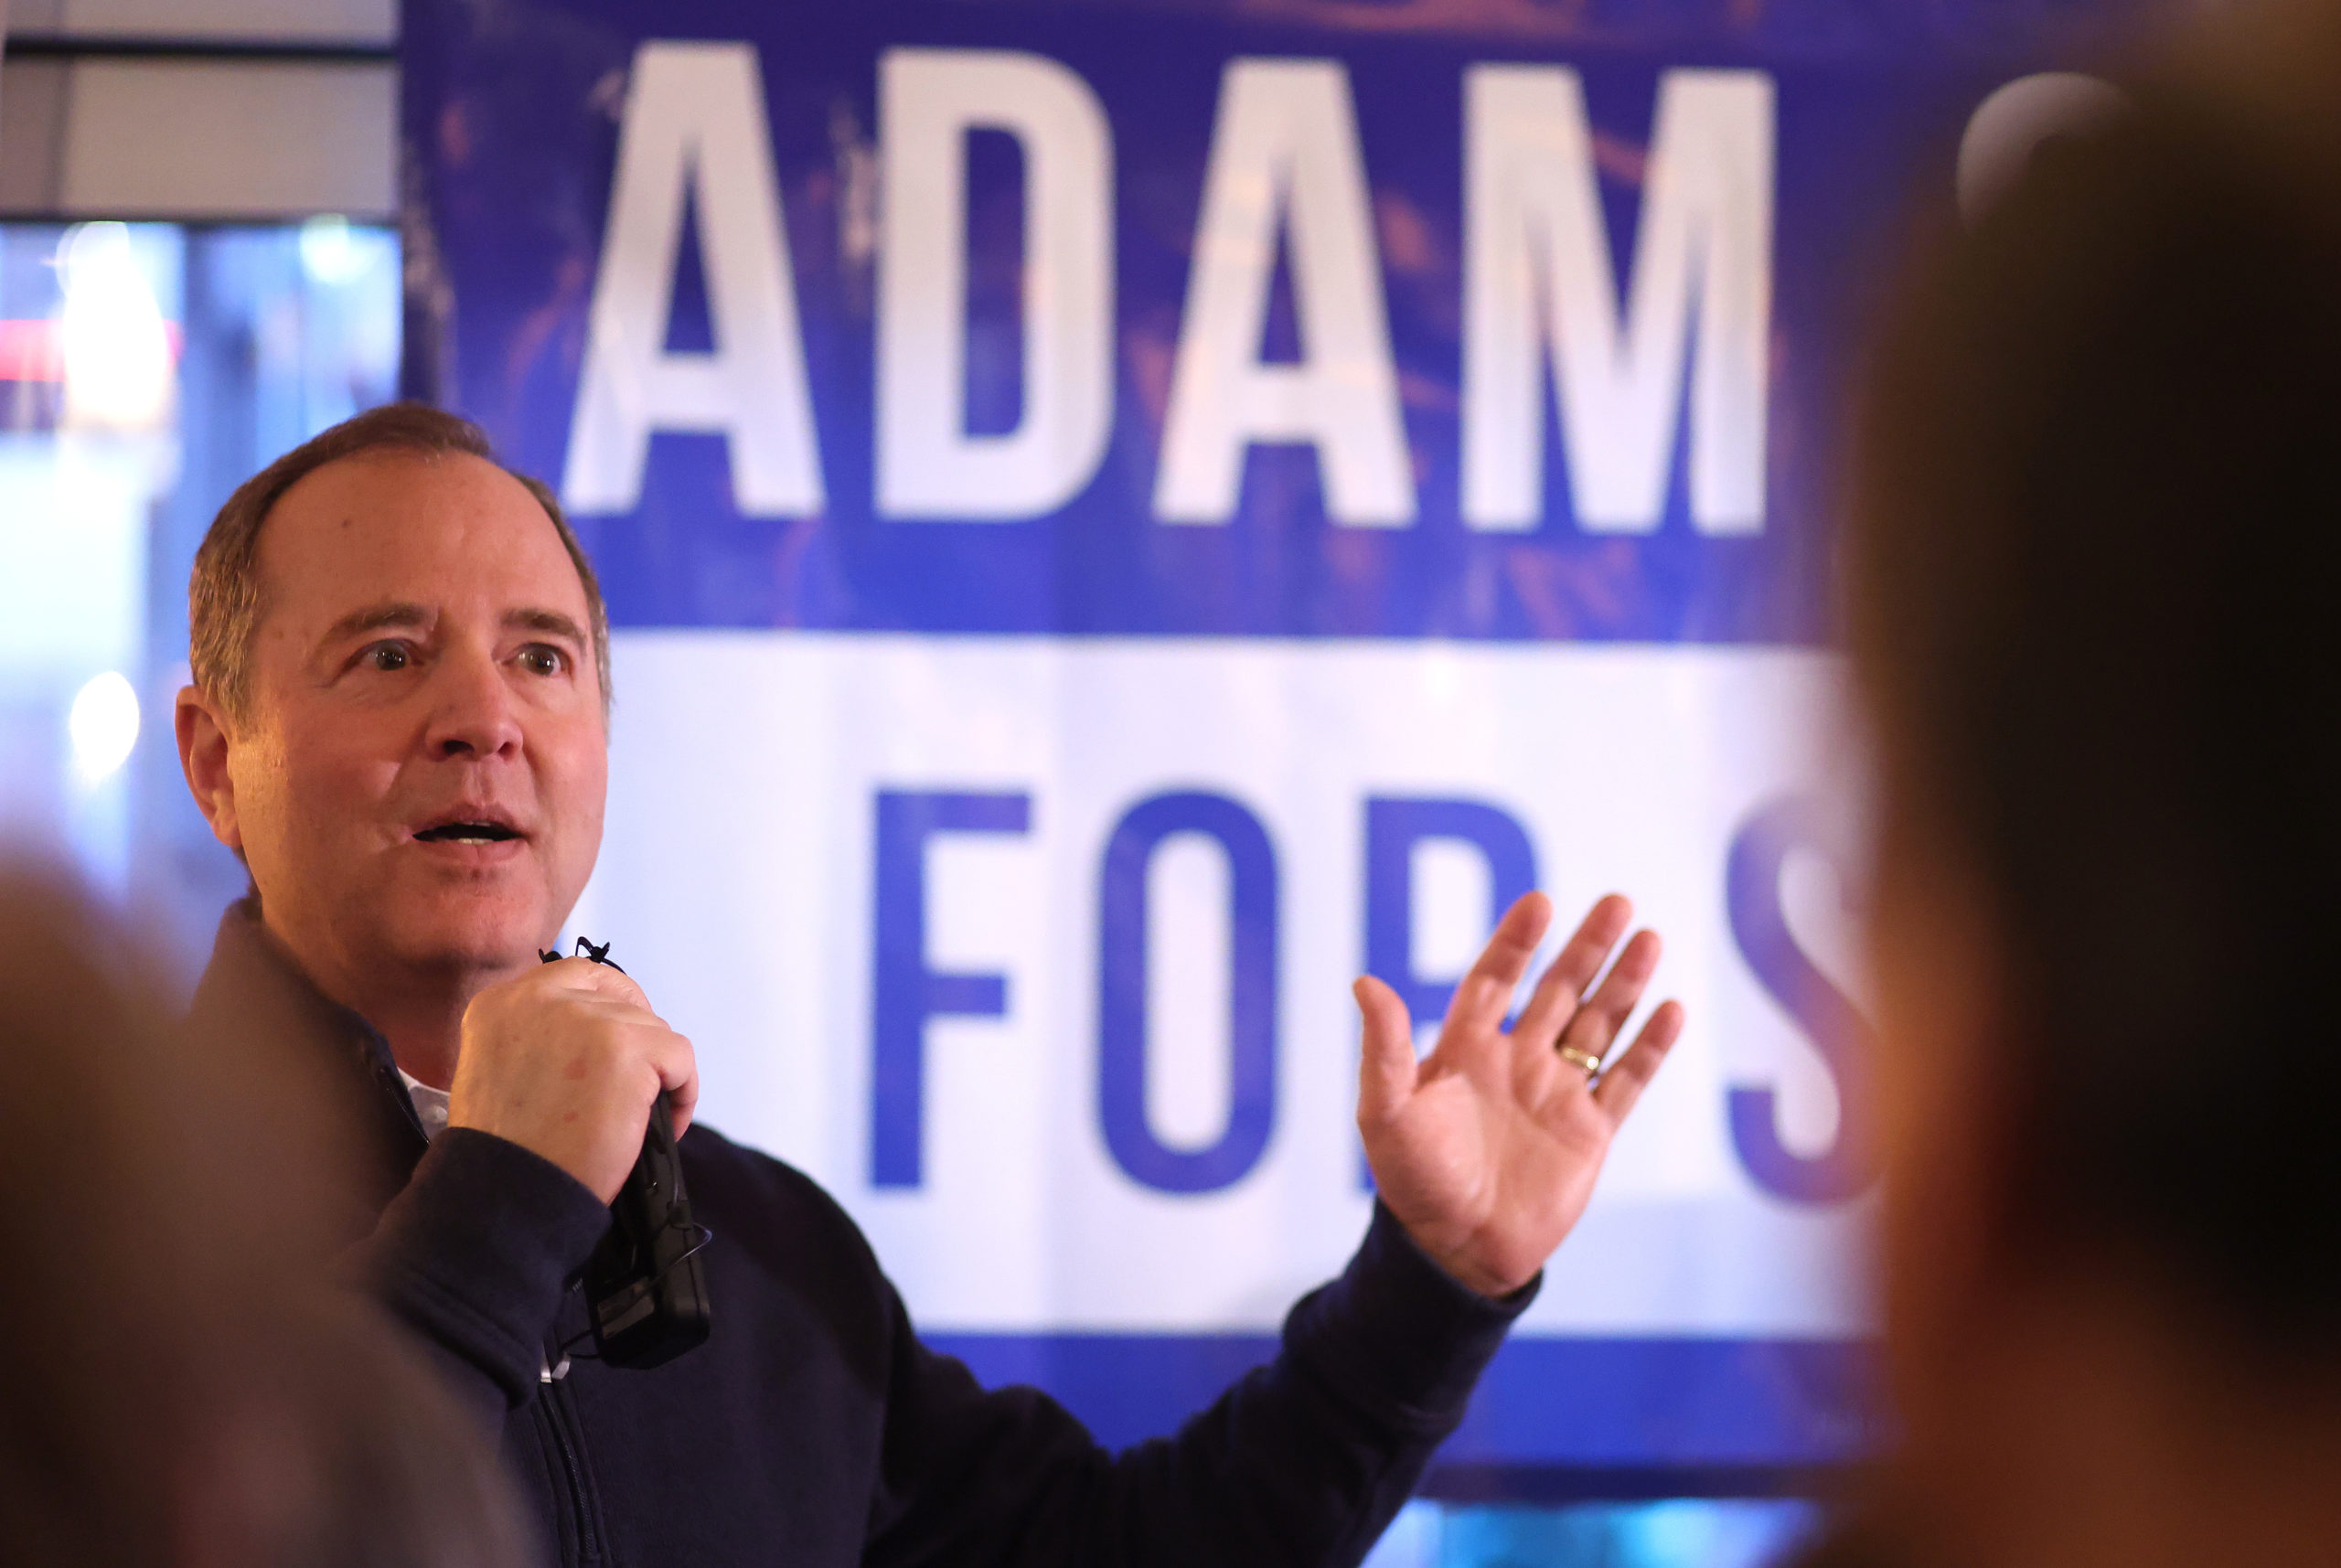 SAN FRANCISCO, CALIFORNIA - FEBRUARY 16: U.S. Rep. Adam Schiff (D-CA) speaks at a campaign event at Manny's on February 16, 2023 in San Francisco, California. Schiff is campaigning for Senate senate currently held by Sen. Dianne Feinstein (D-CA), who has announced that she will not run for re-election. (Photo by Justin Sullivan/Getty Images)